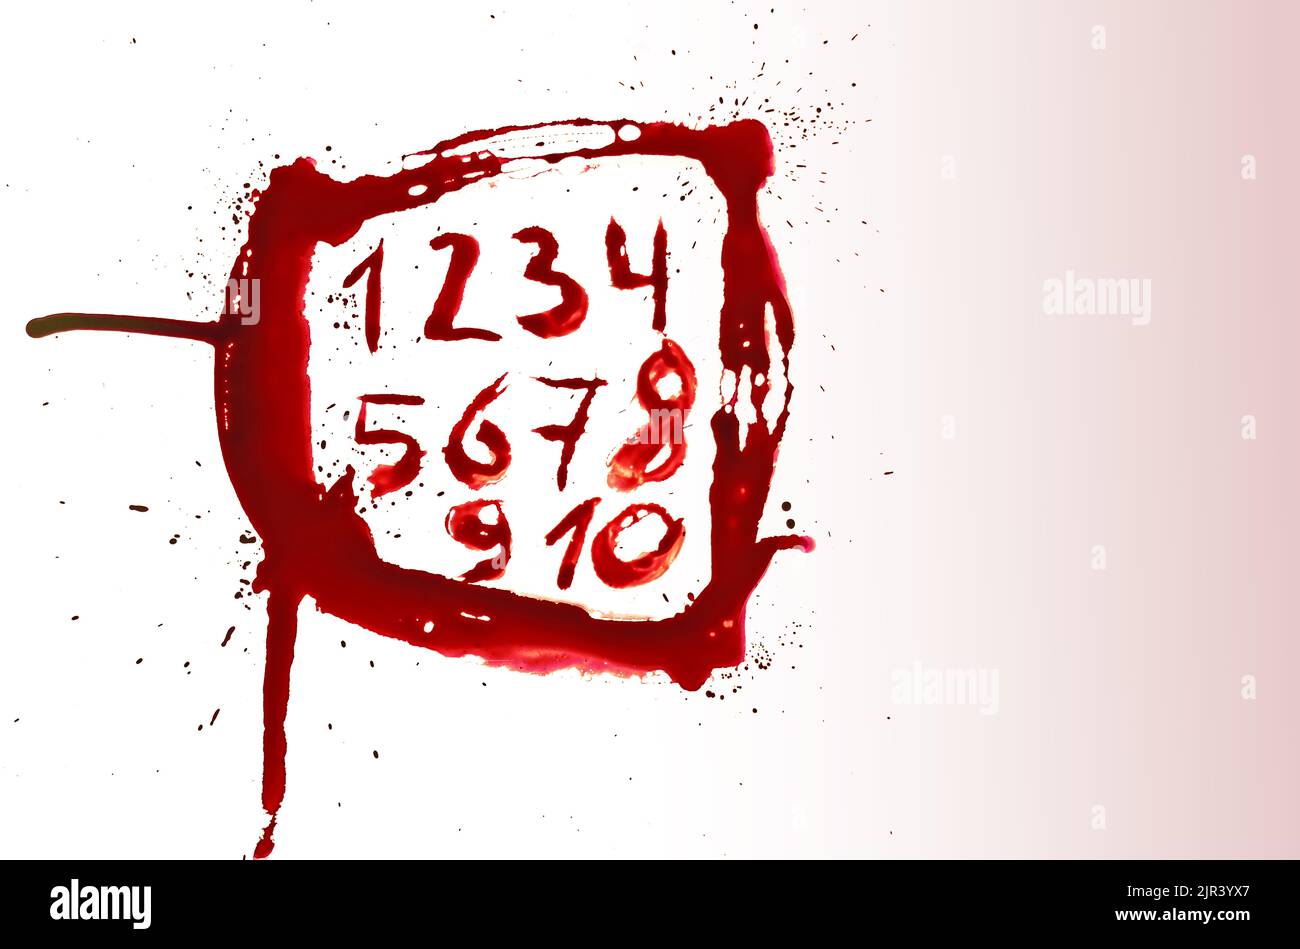 numbers written in blood.bloody numbers in a red bloody frame made of bloody smudges and drops. Horror and crime. Crime alphabet. Stock Photo